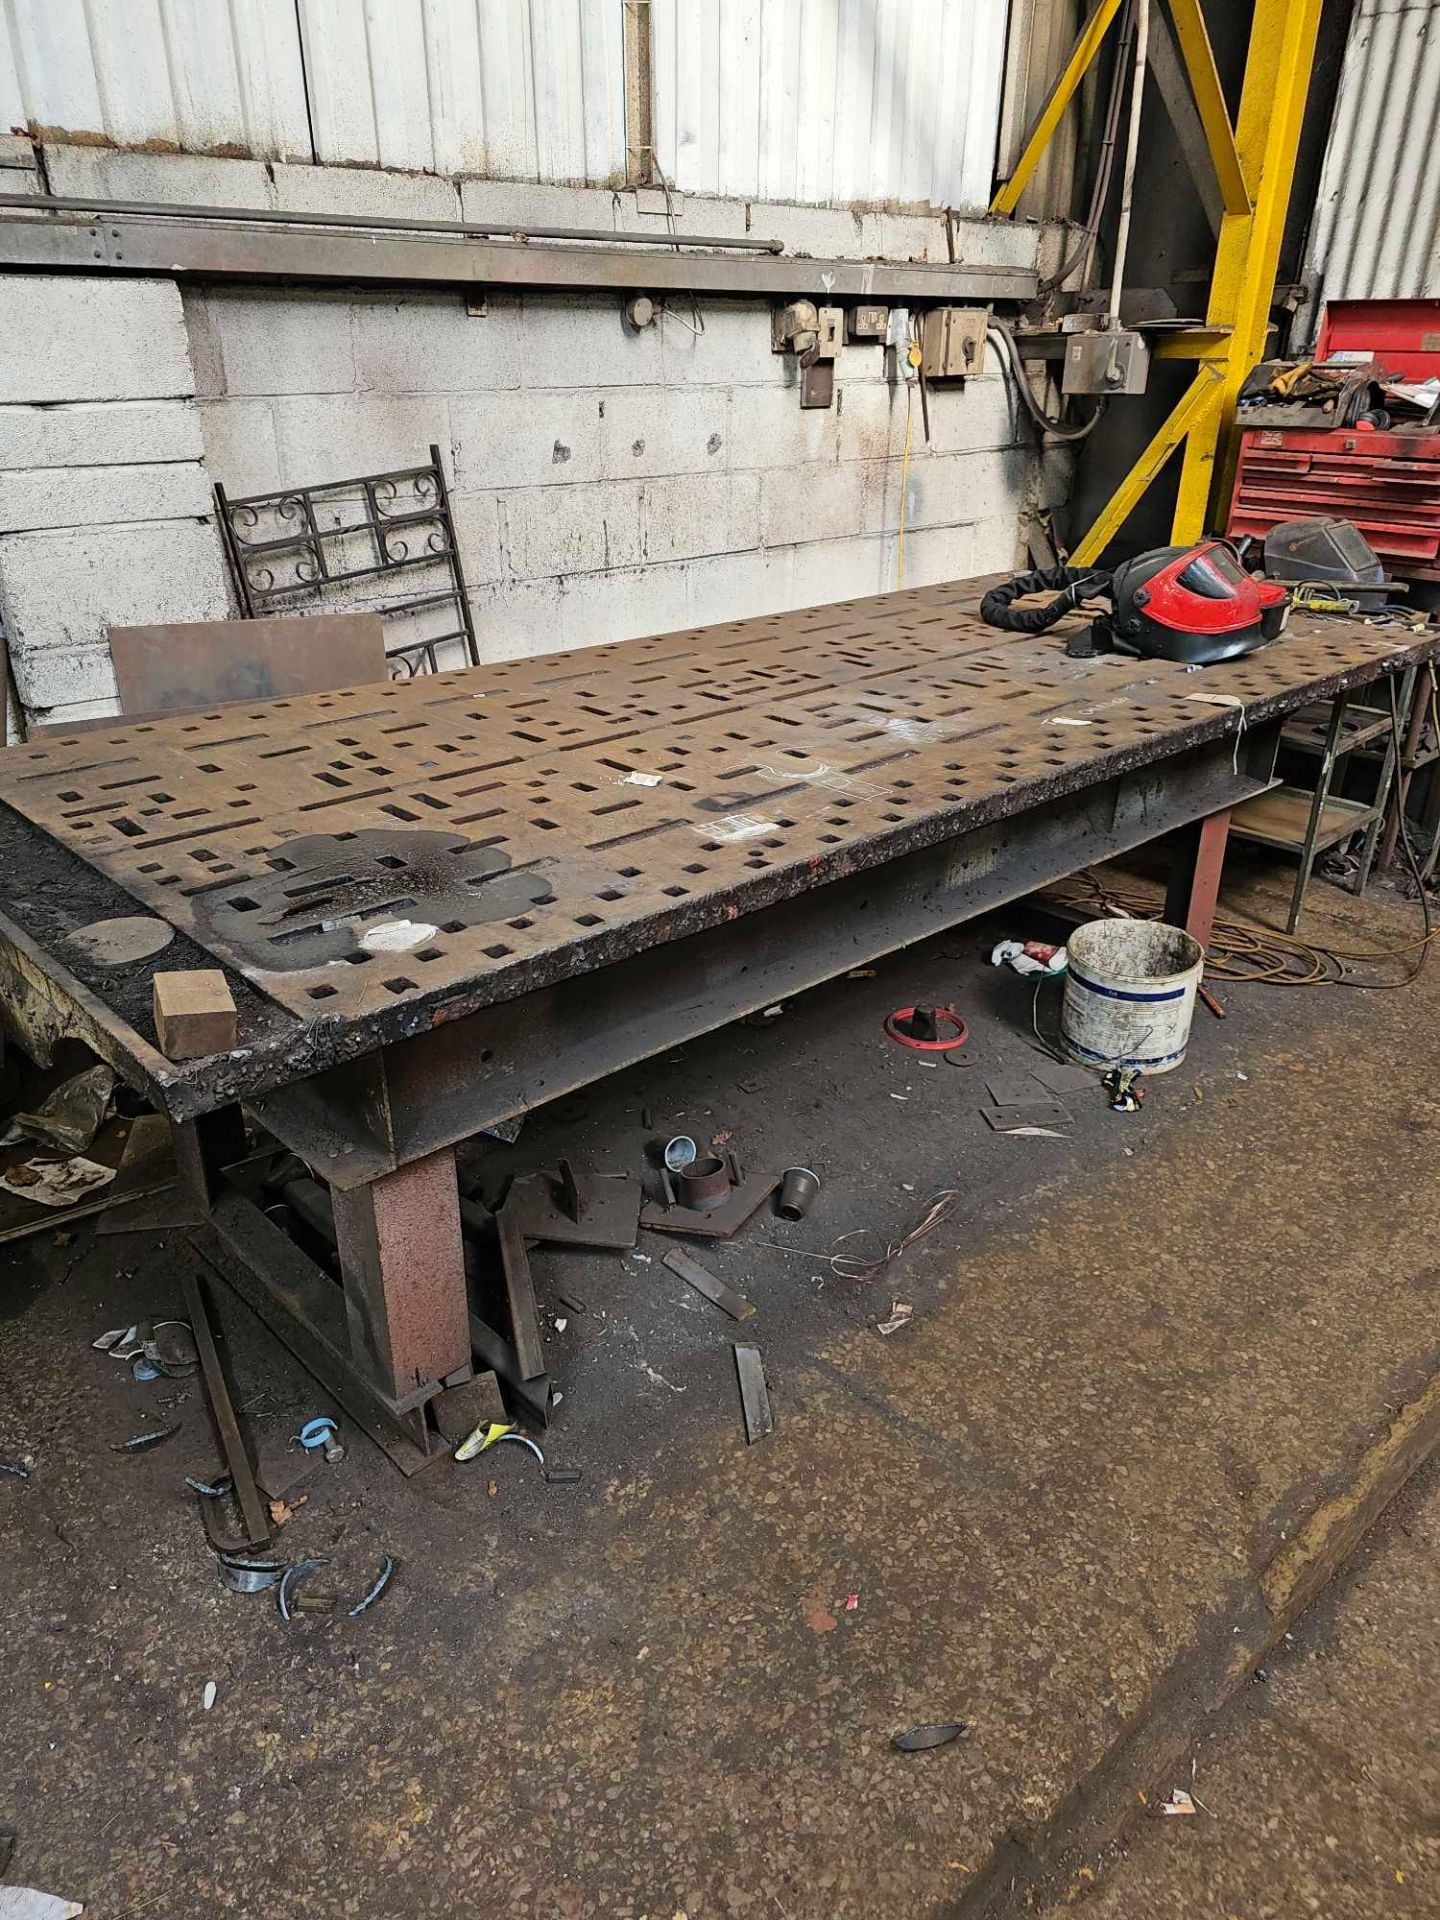 Cast Steel Engineers Marking Out Work Bench 310 x 128 x 91cm Weight 2000kg - Image 2 of 4